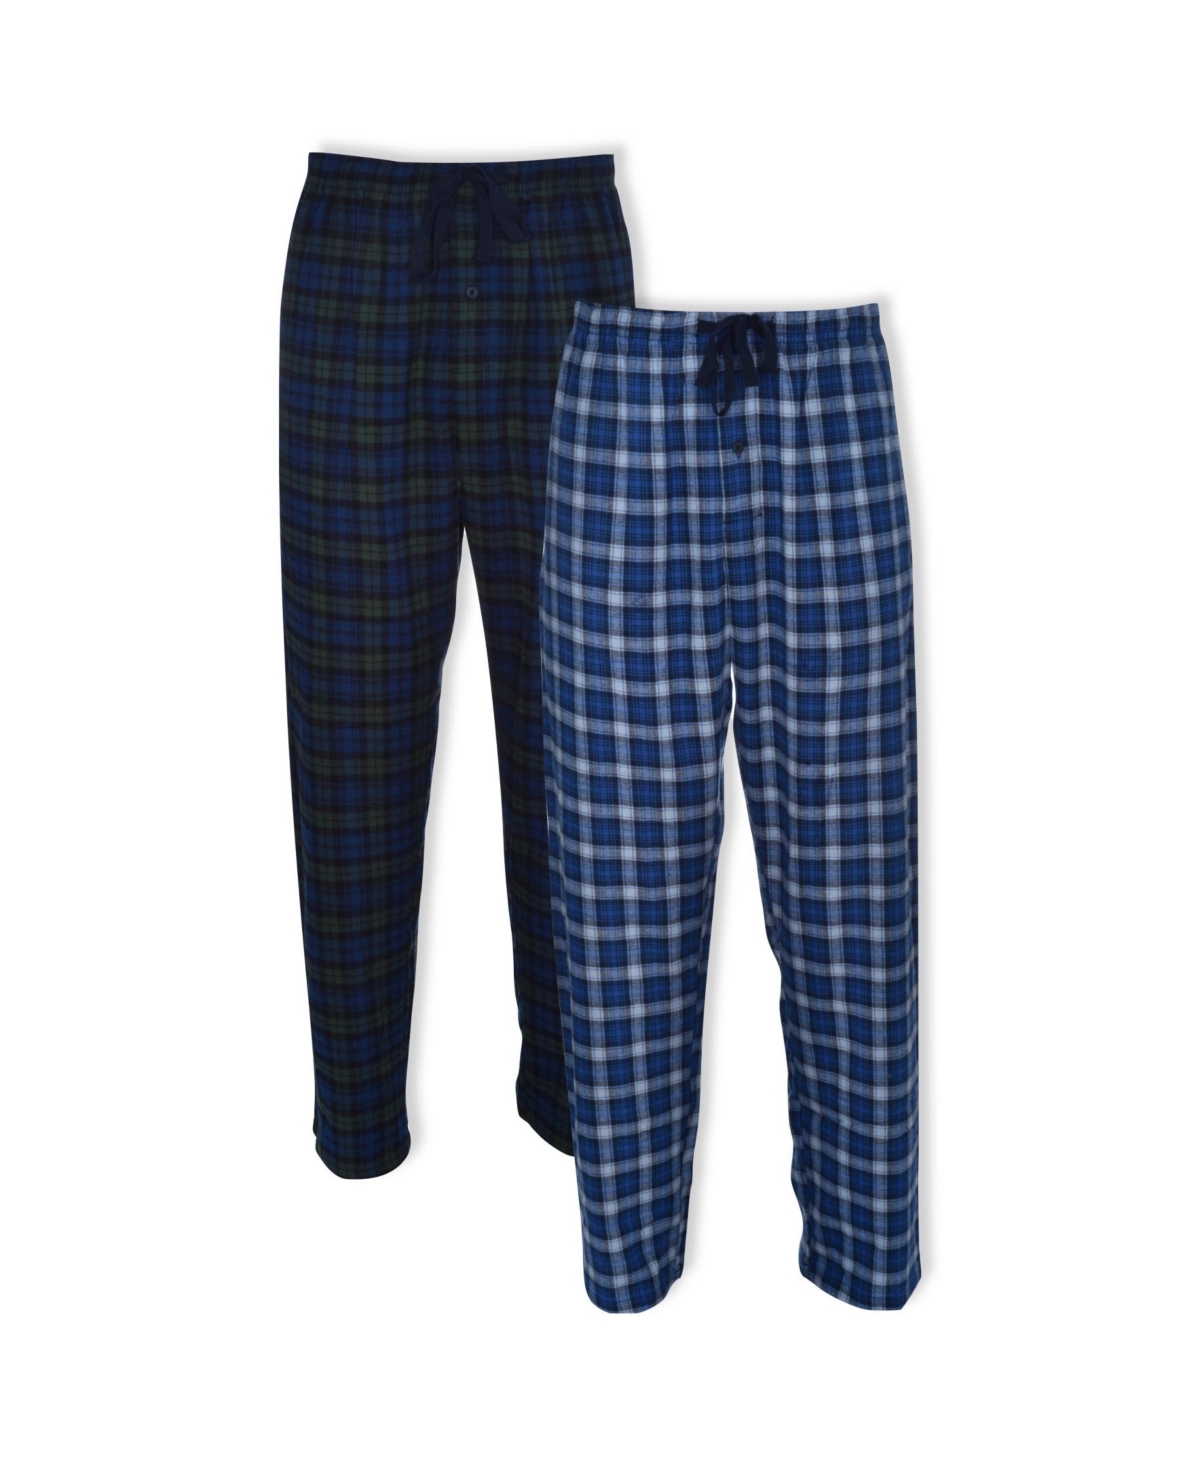 Hanes Platinum Hanes Men's Big and Tall Flannel Sleep Pant, 2 Pack